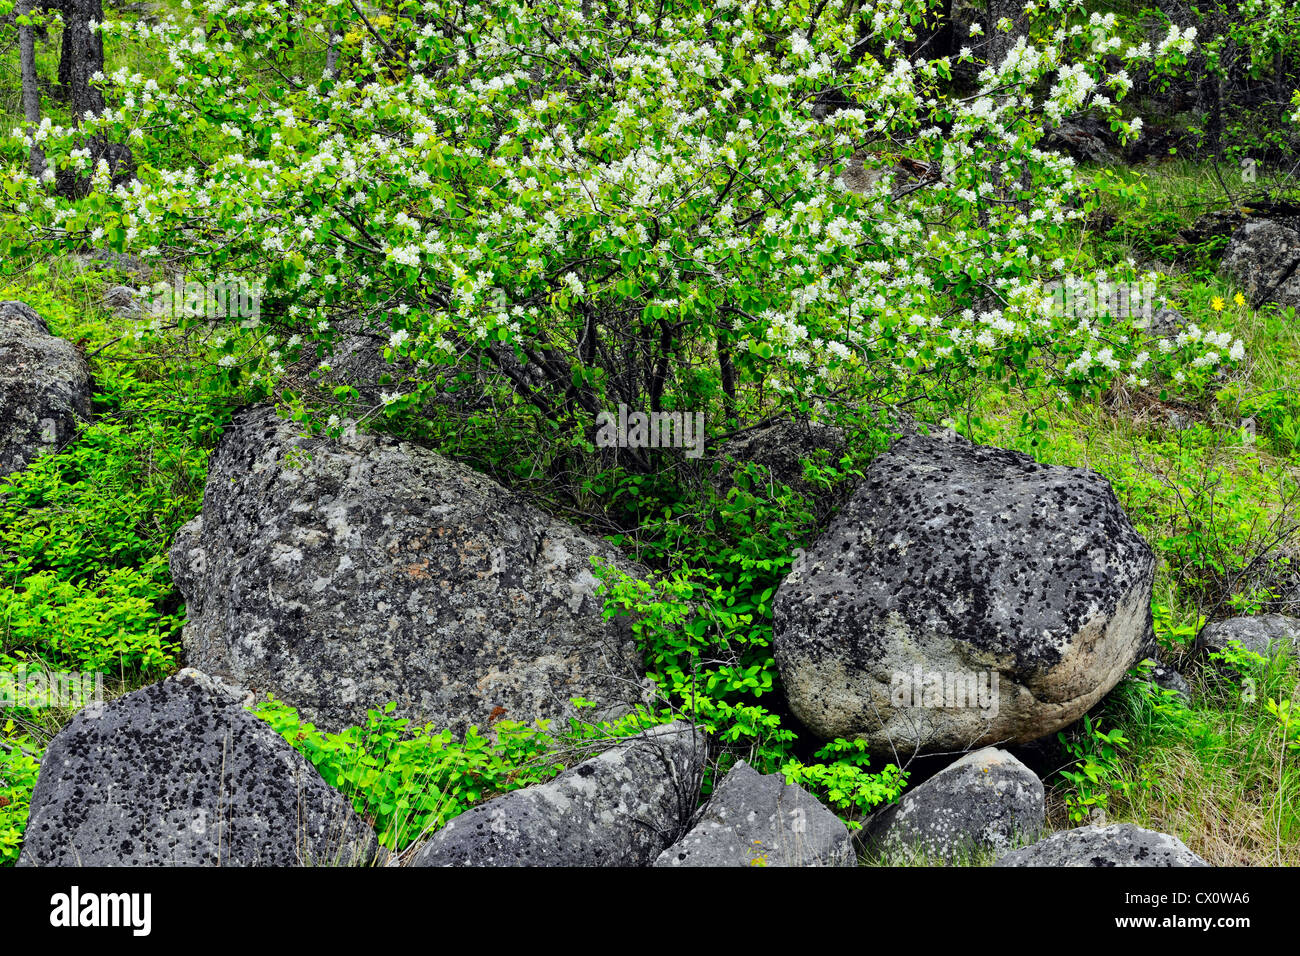 Rock outcrops with western serviceberry (Amelanchier alnifolia), near Hedley, BC, Canada Stock Photo